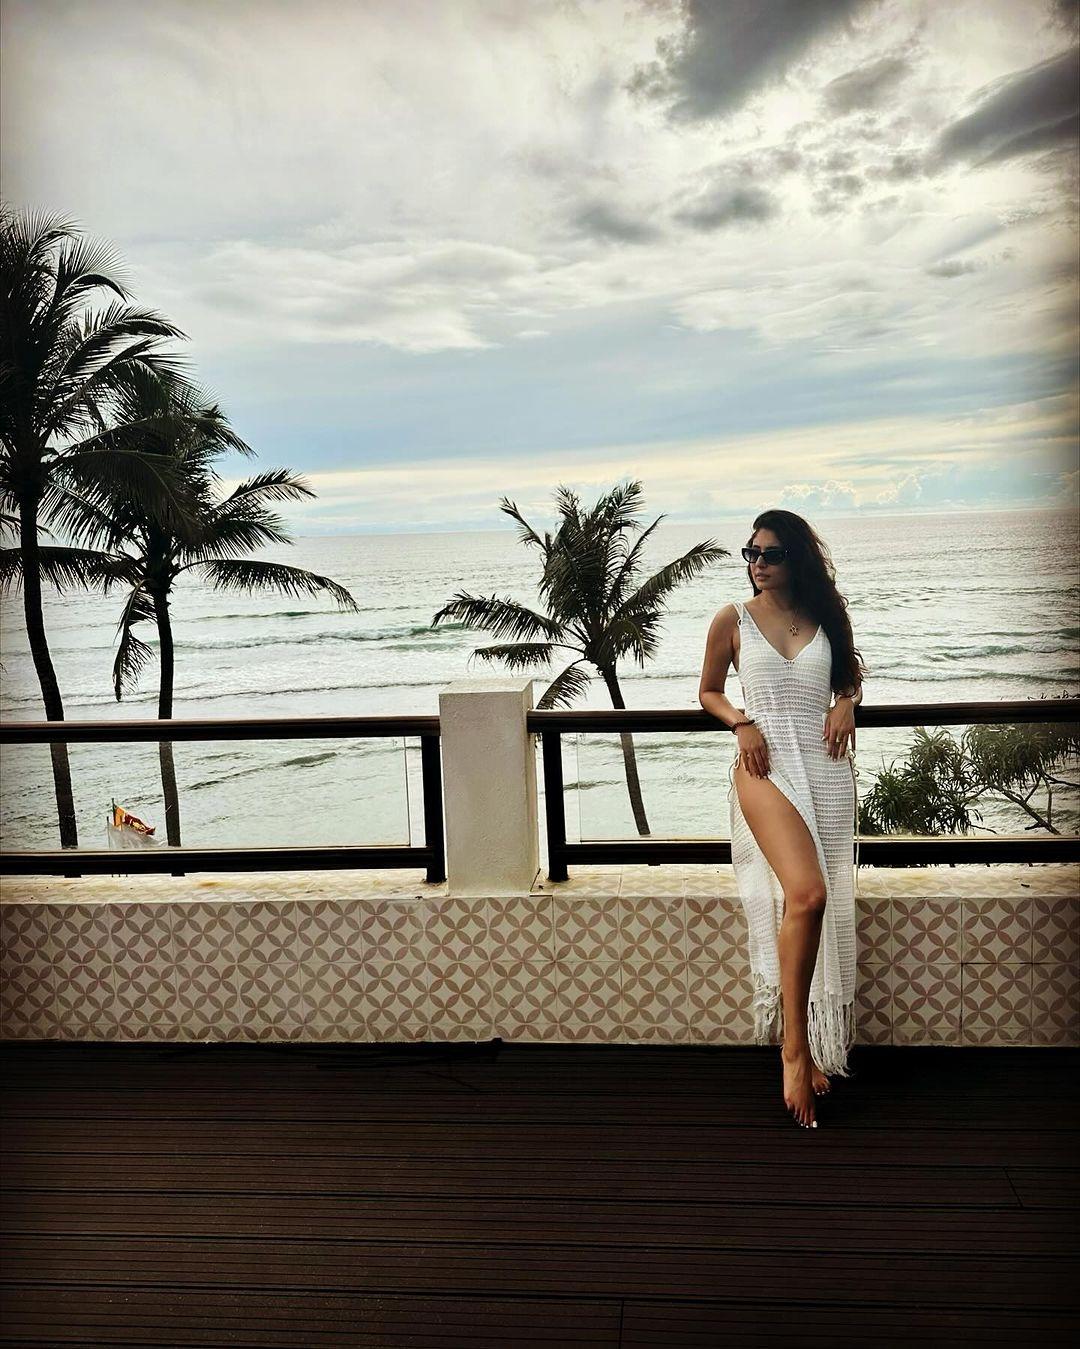 Actress Kritika Kamra is in the mood to just sit in front of the beach and watch the waves. She shared photos from her beach getaway